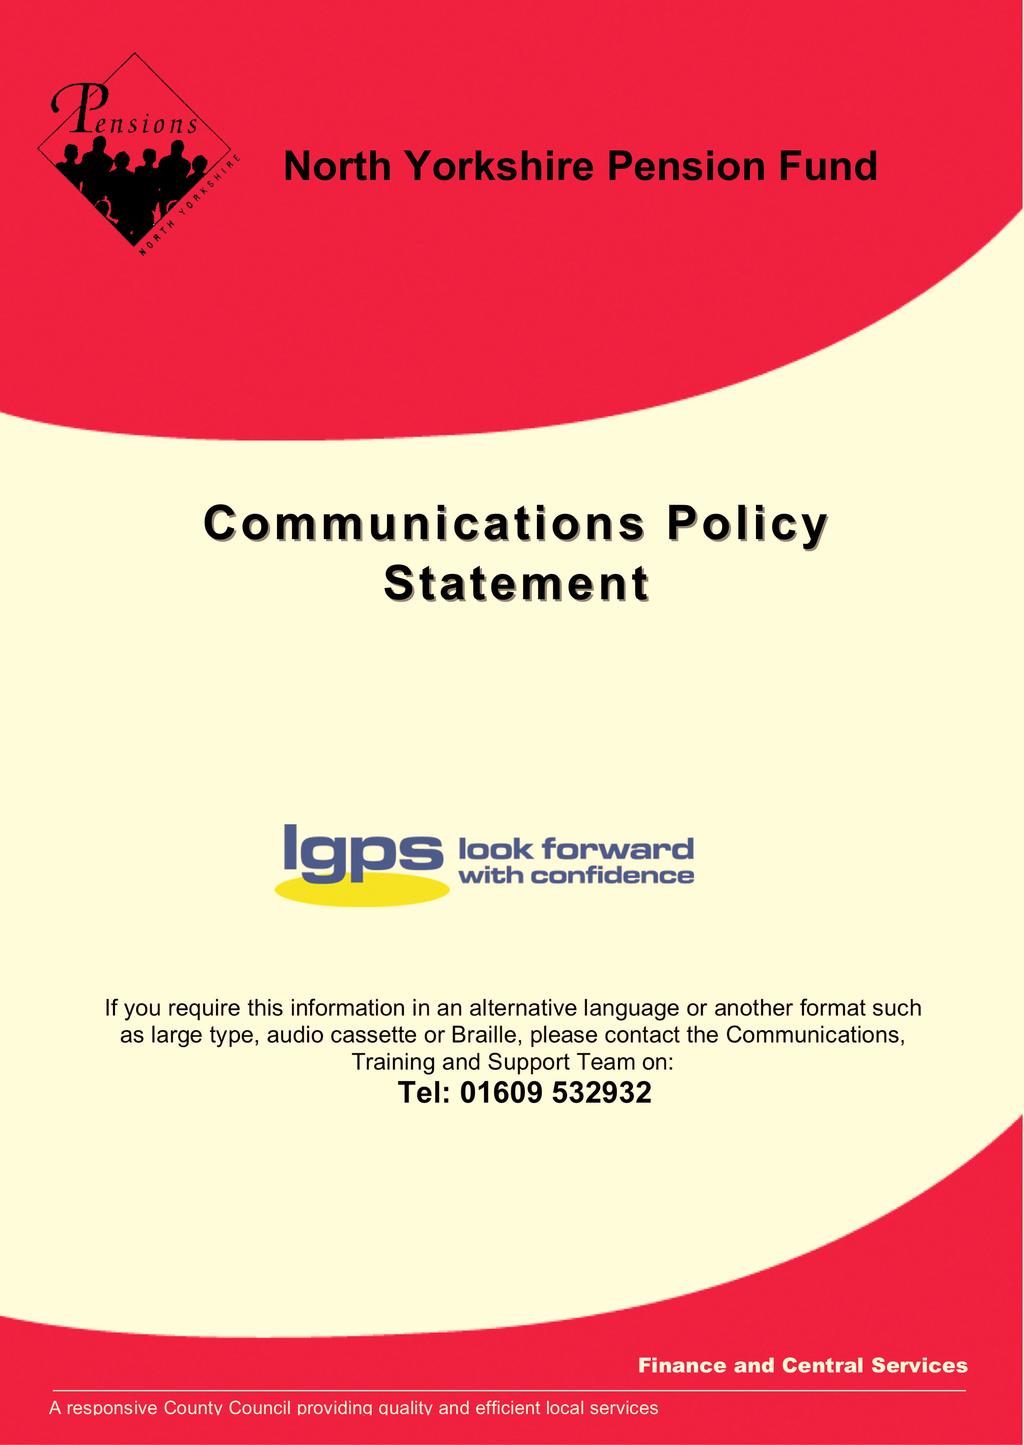 North Yorkshire Pension Fund Communications Policy Statement A responsive County